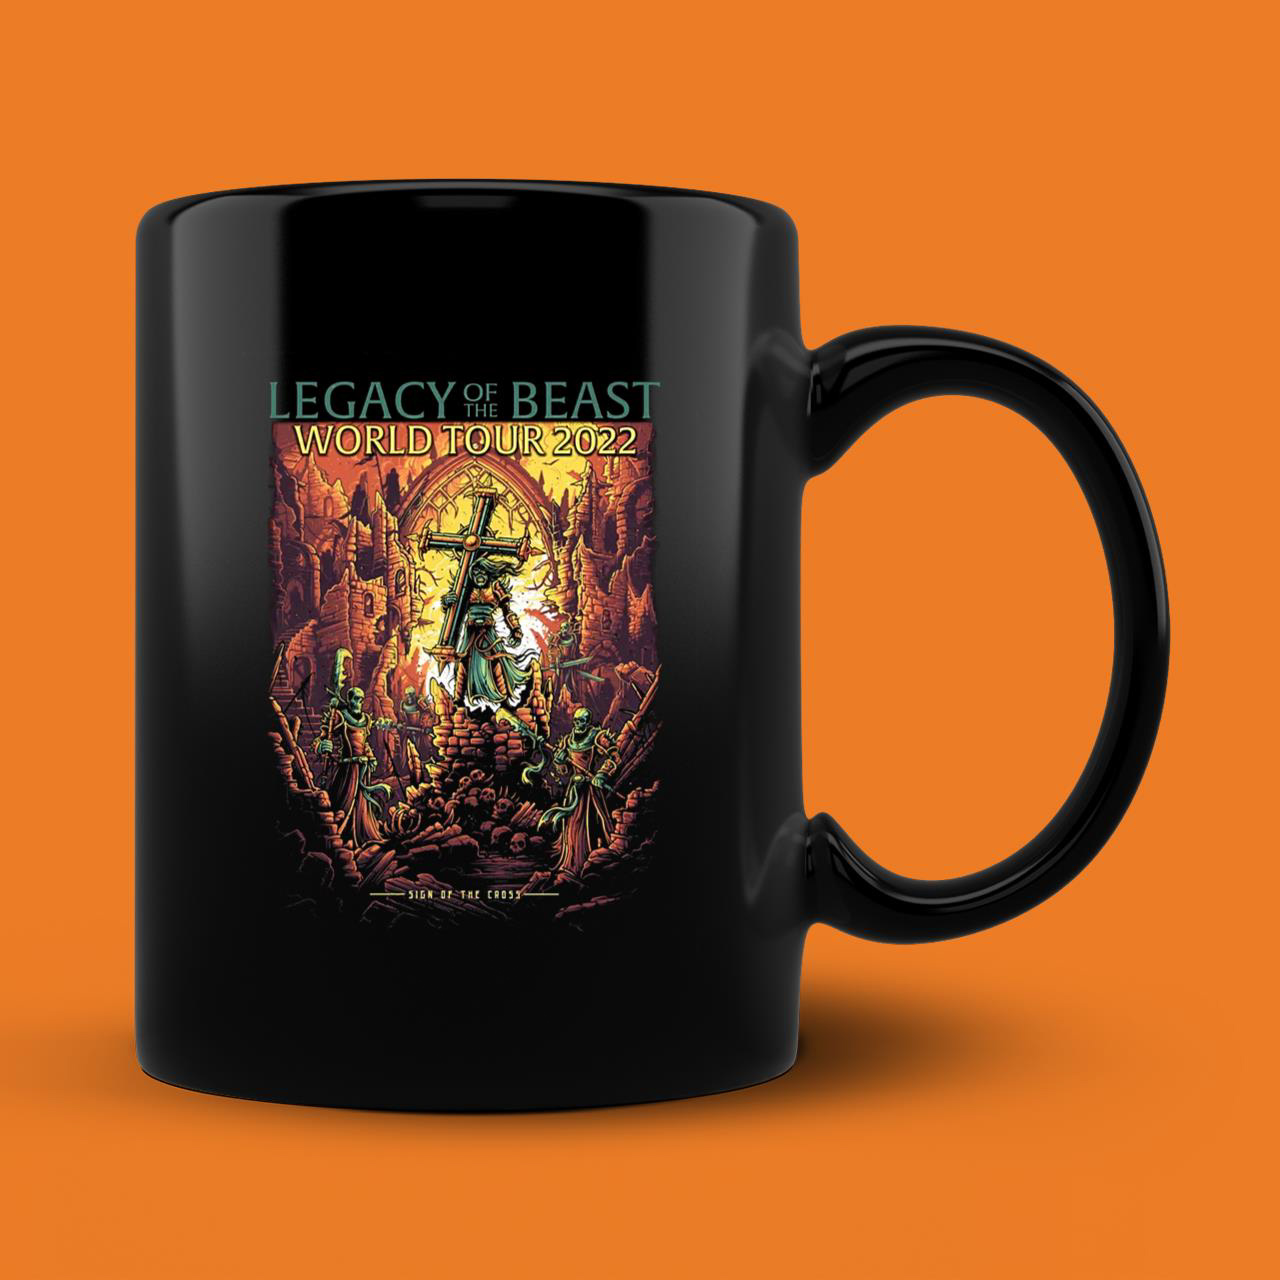 Iron Maiden Legacy Of The Beast Tour 2022 Sign Of The Cross Mug